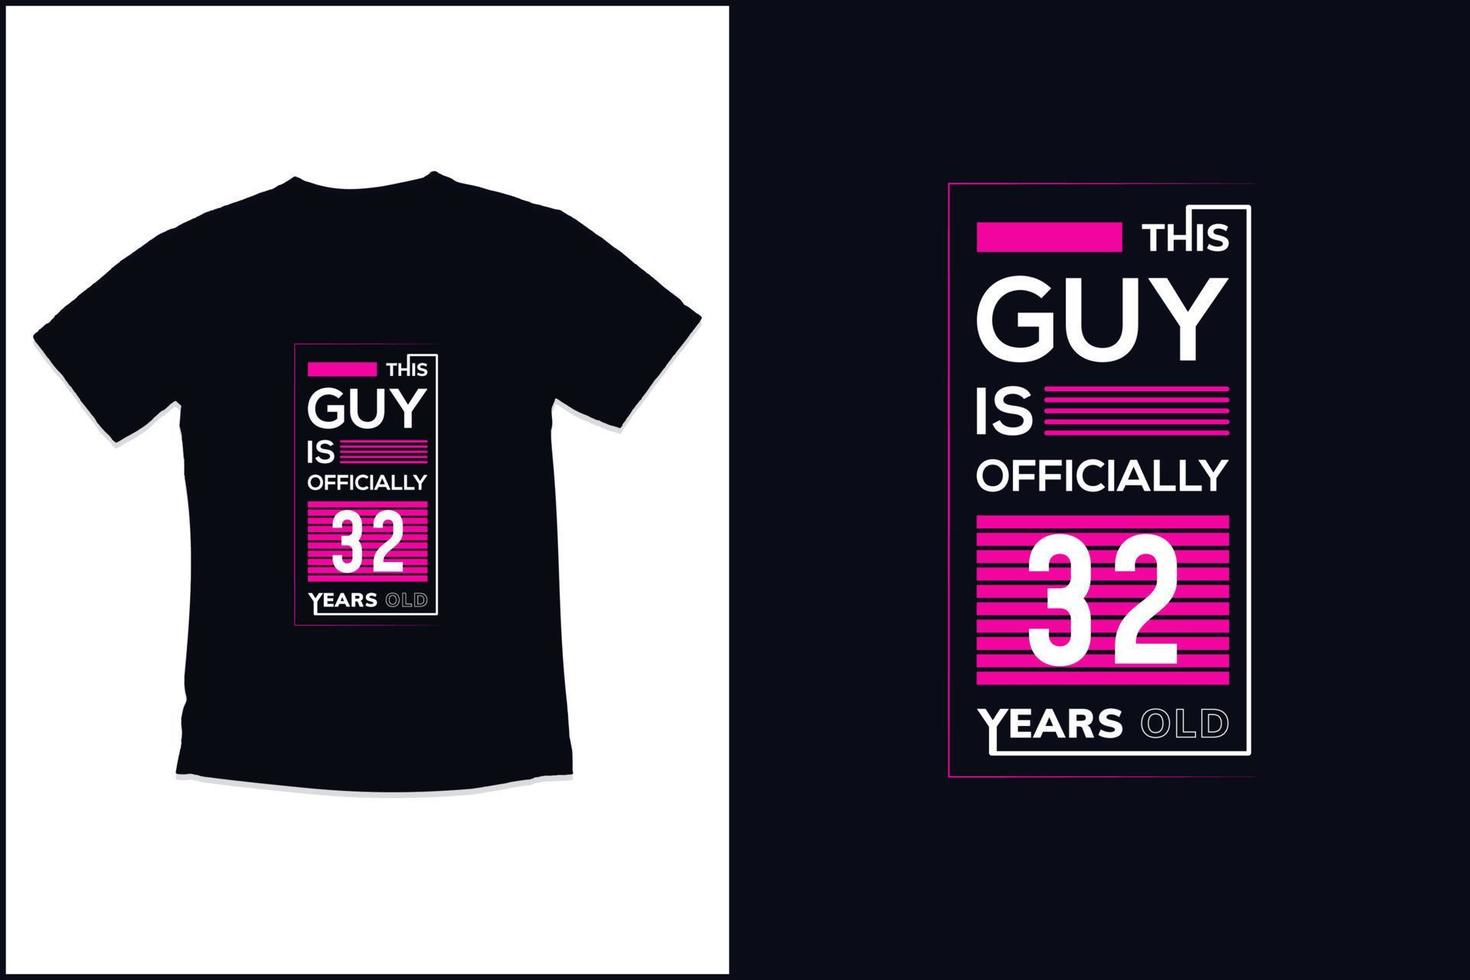 Birthday t shirt design with  modern quotes typography t shirt design vector